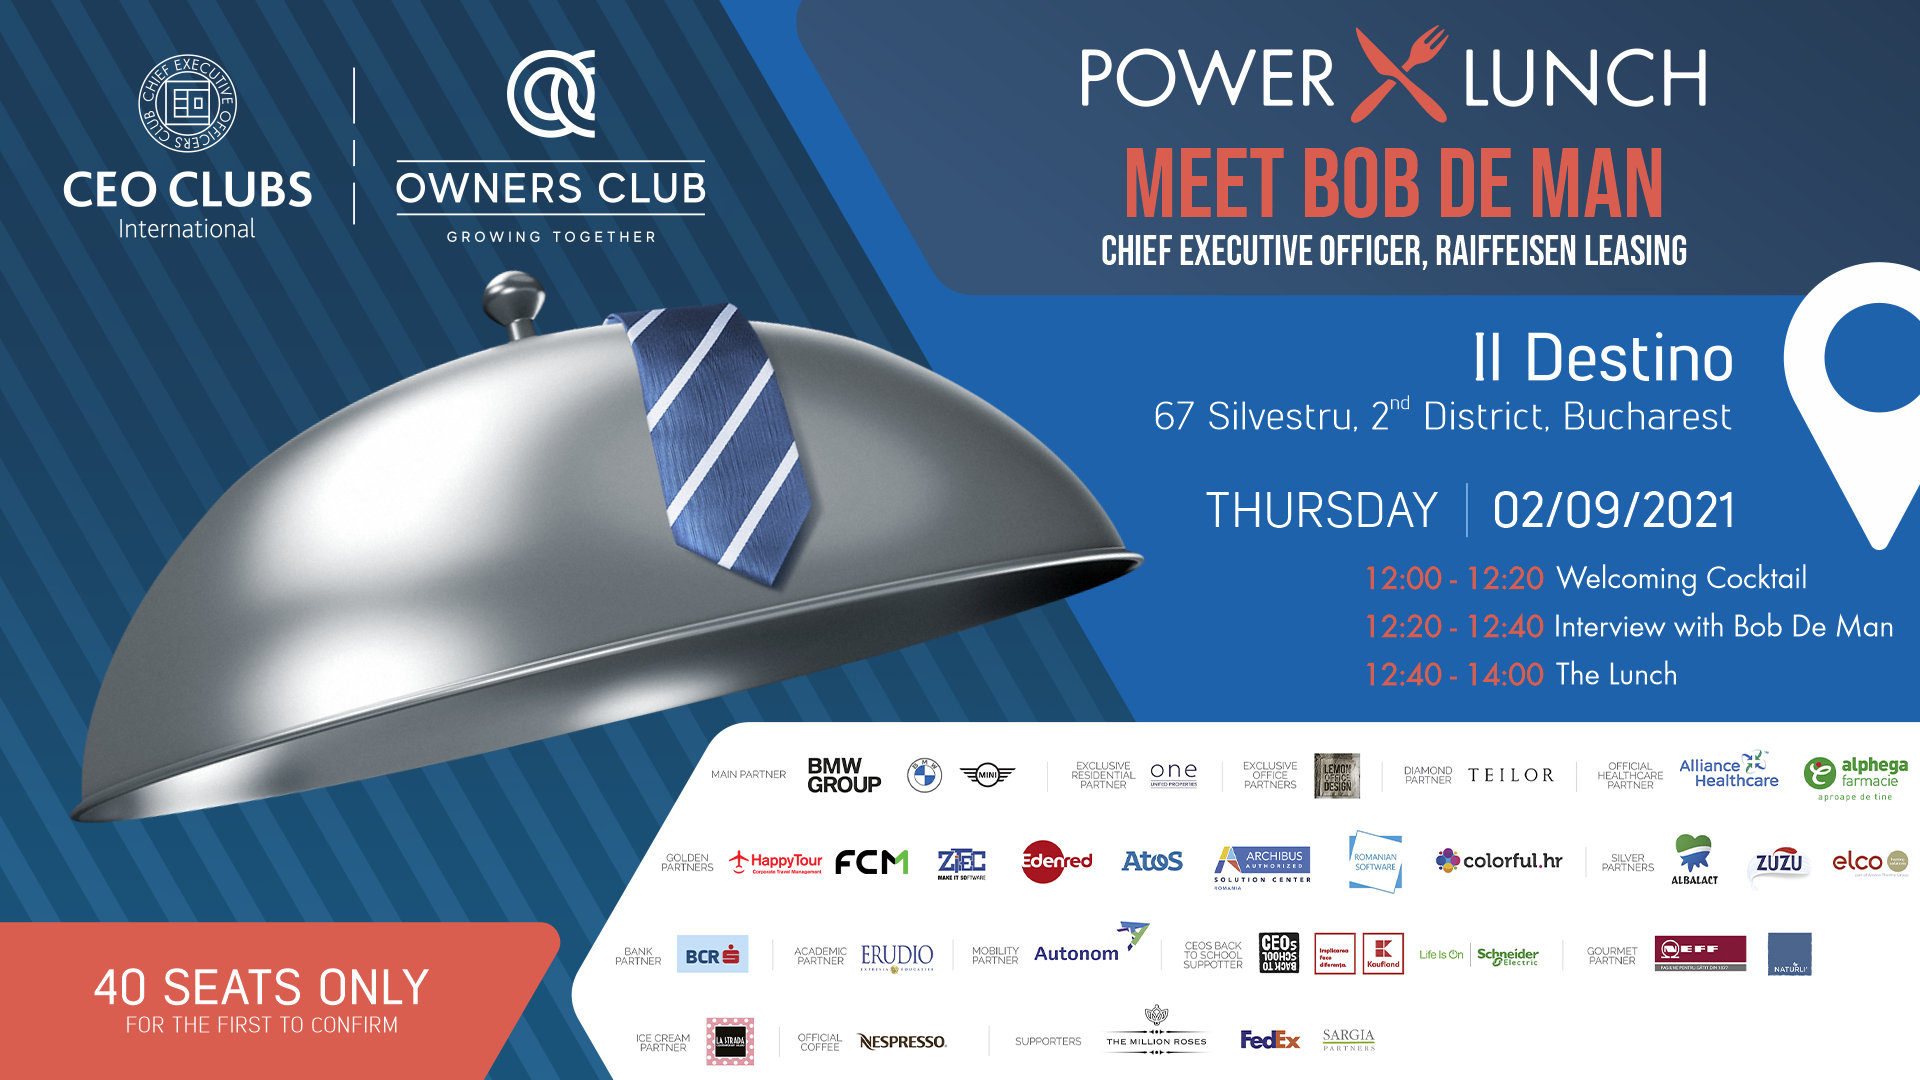 CEO Clubs & Owners Club LIVE Power Lunch with Bob De Man